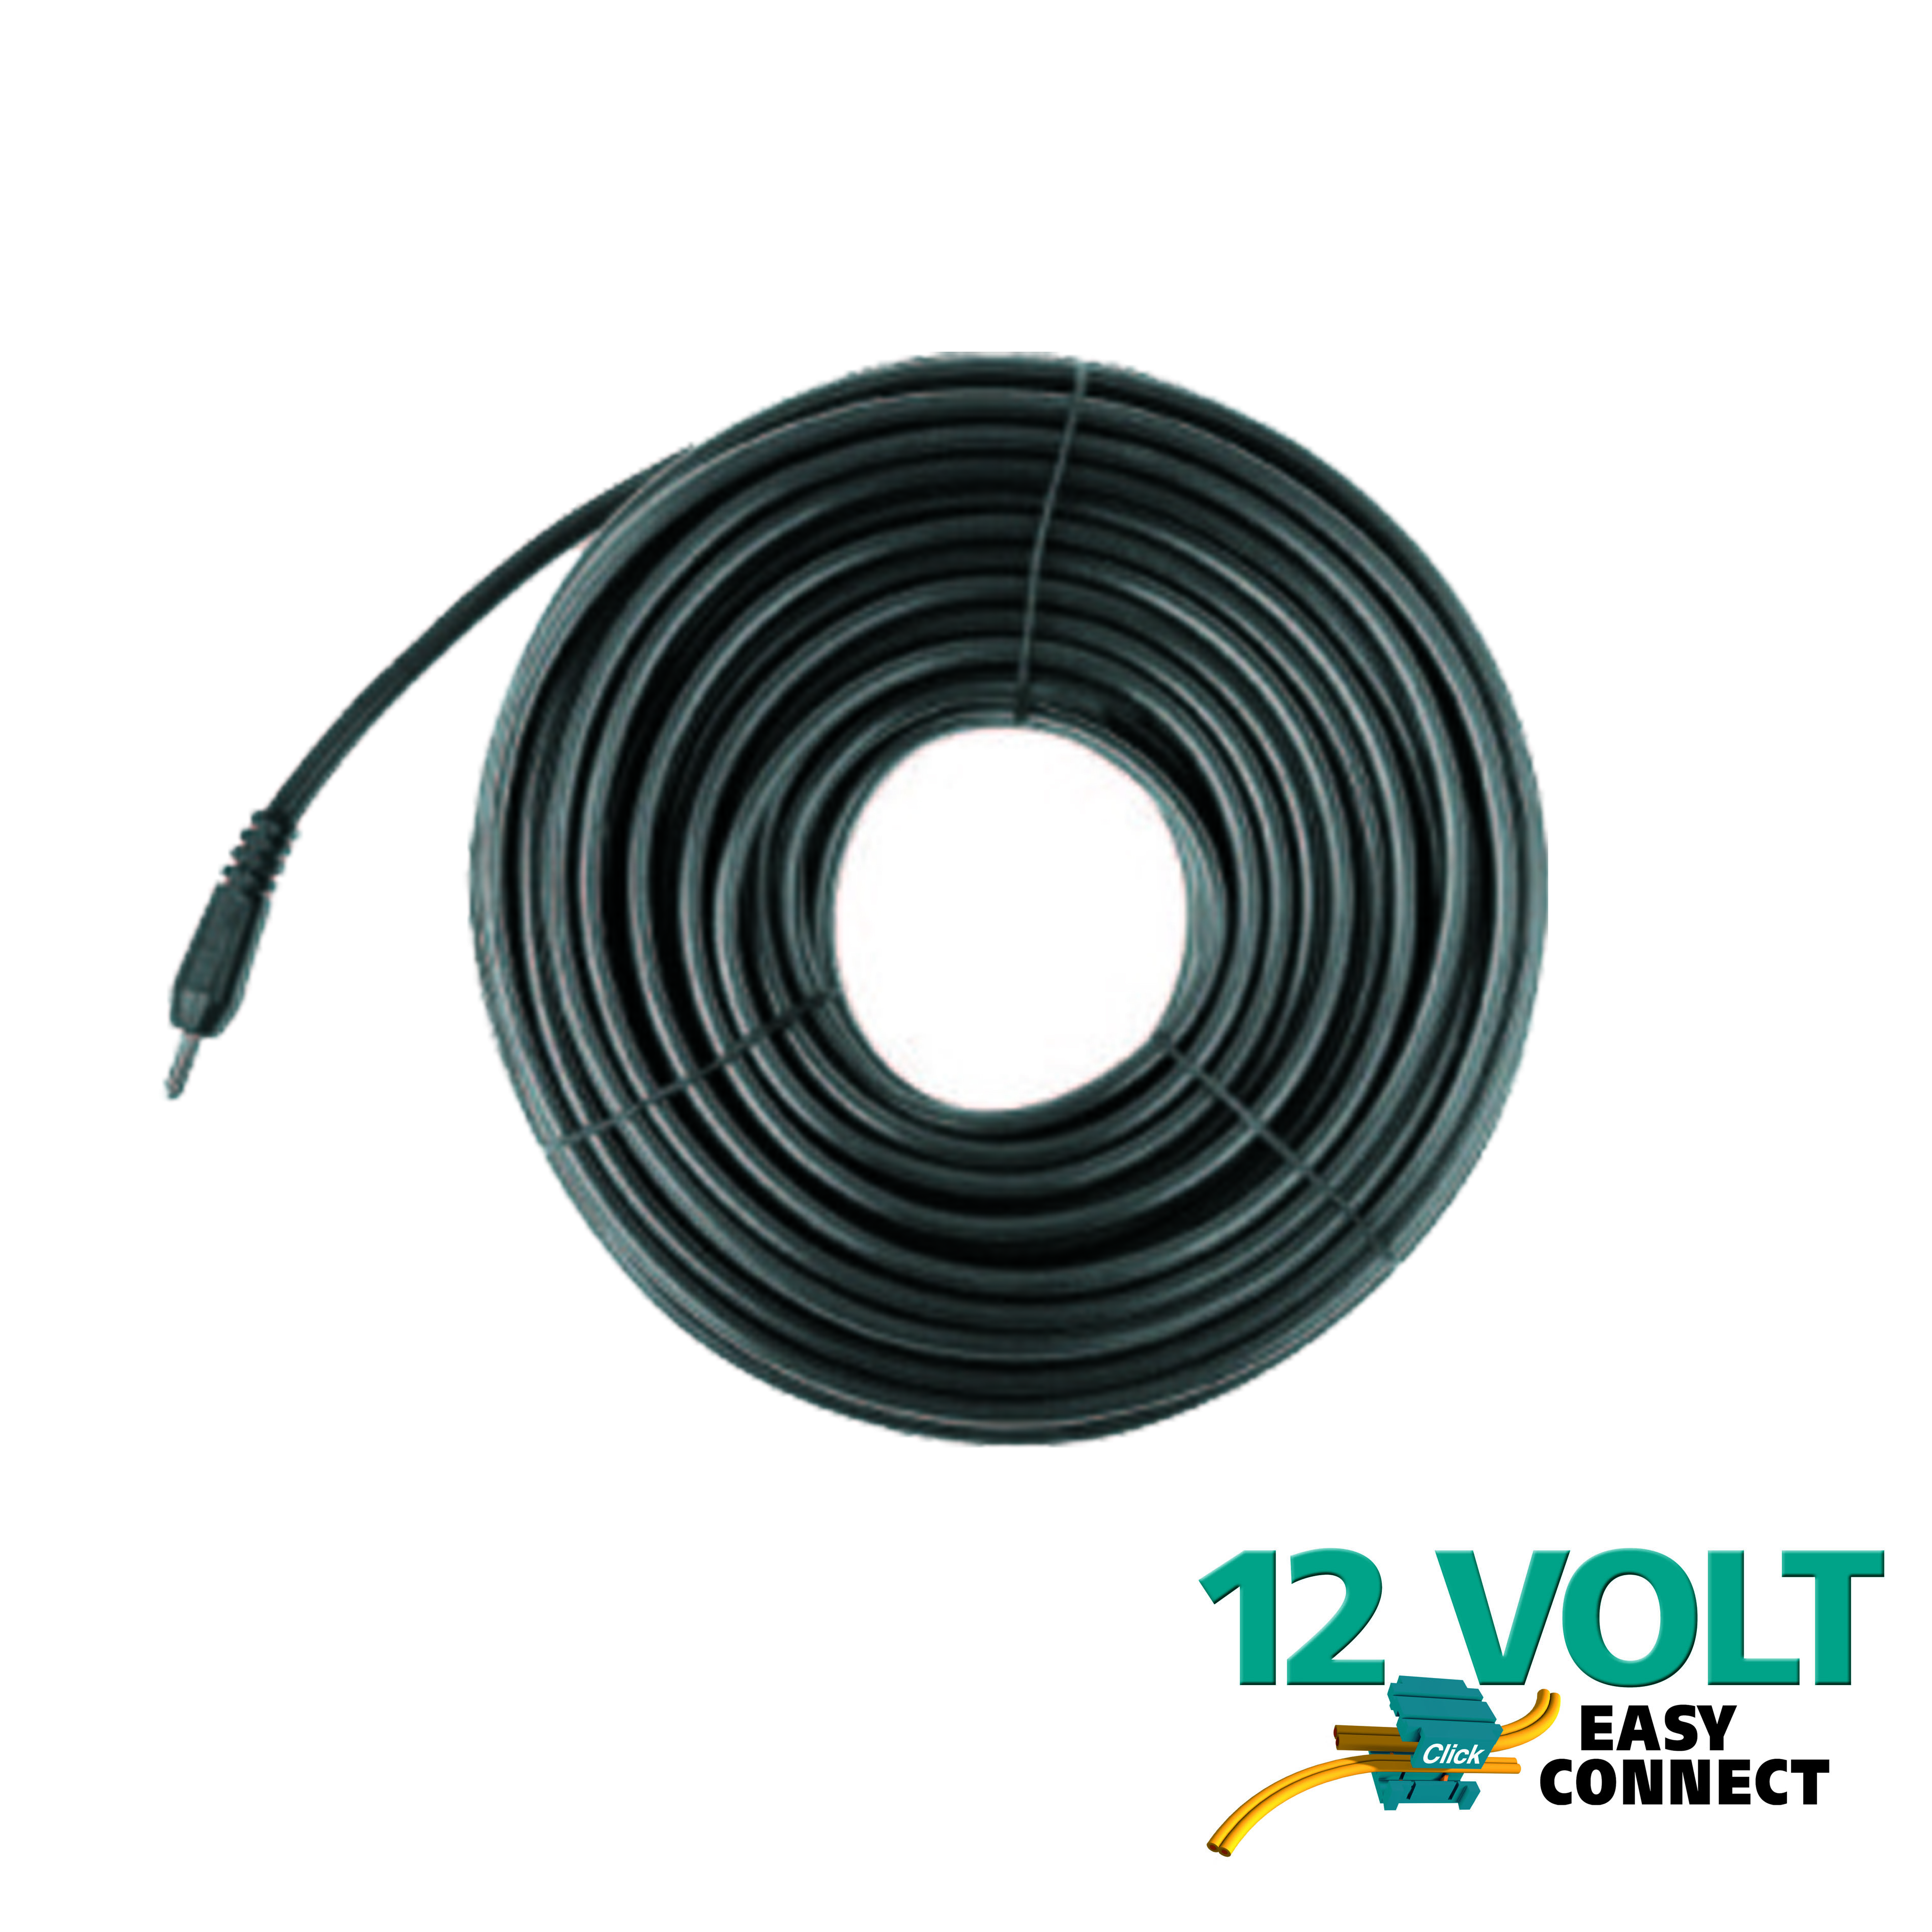 15 MTR SPT3 Main cable with Plug